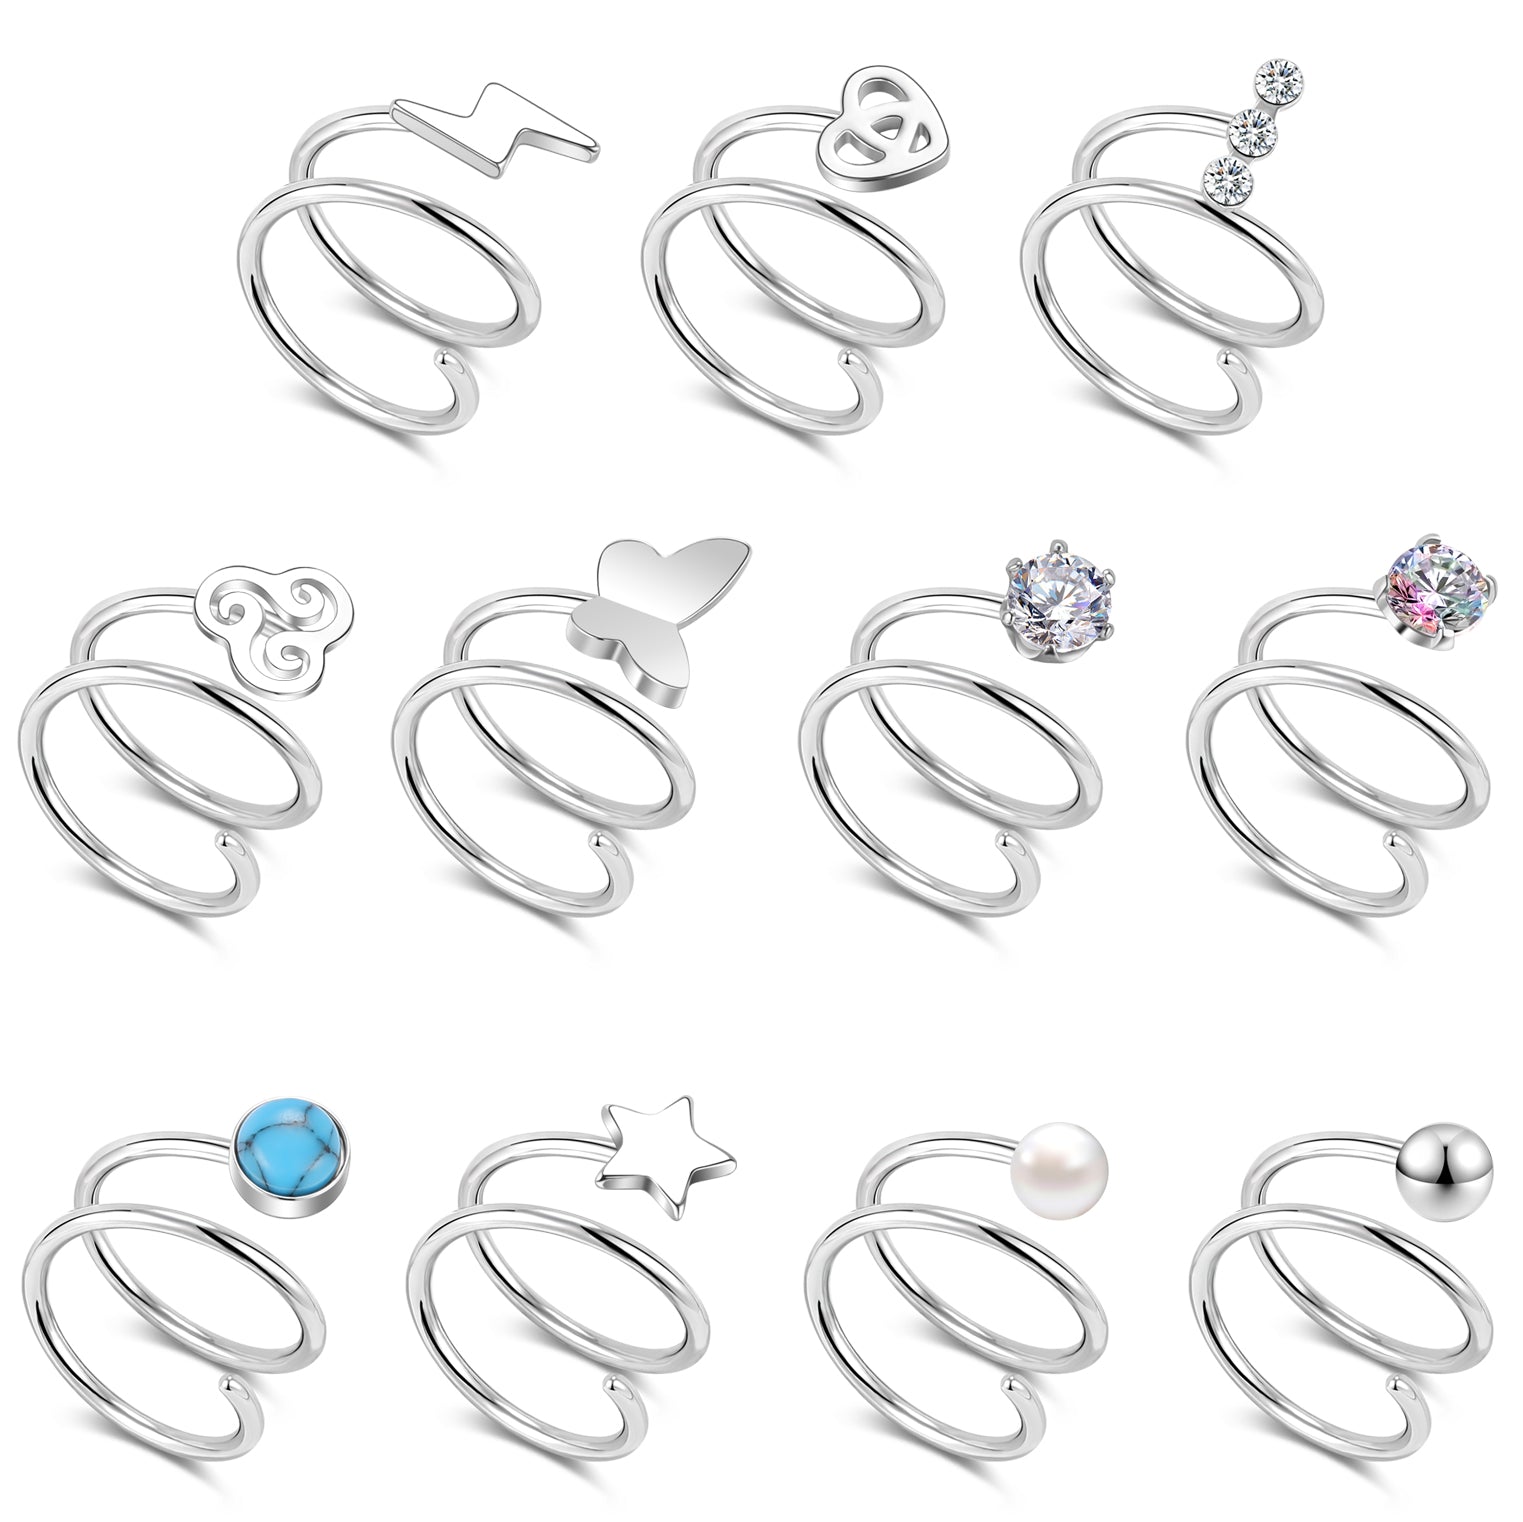 20G-Peach-Heart-Nose-Rings-Double-Layered-Spiral-Nose-Piercing-Stainless-Steel-Nostril-Rings